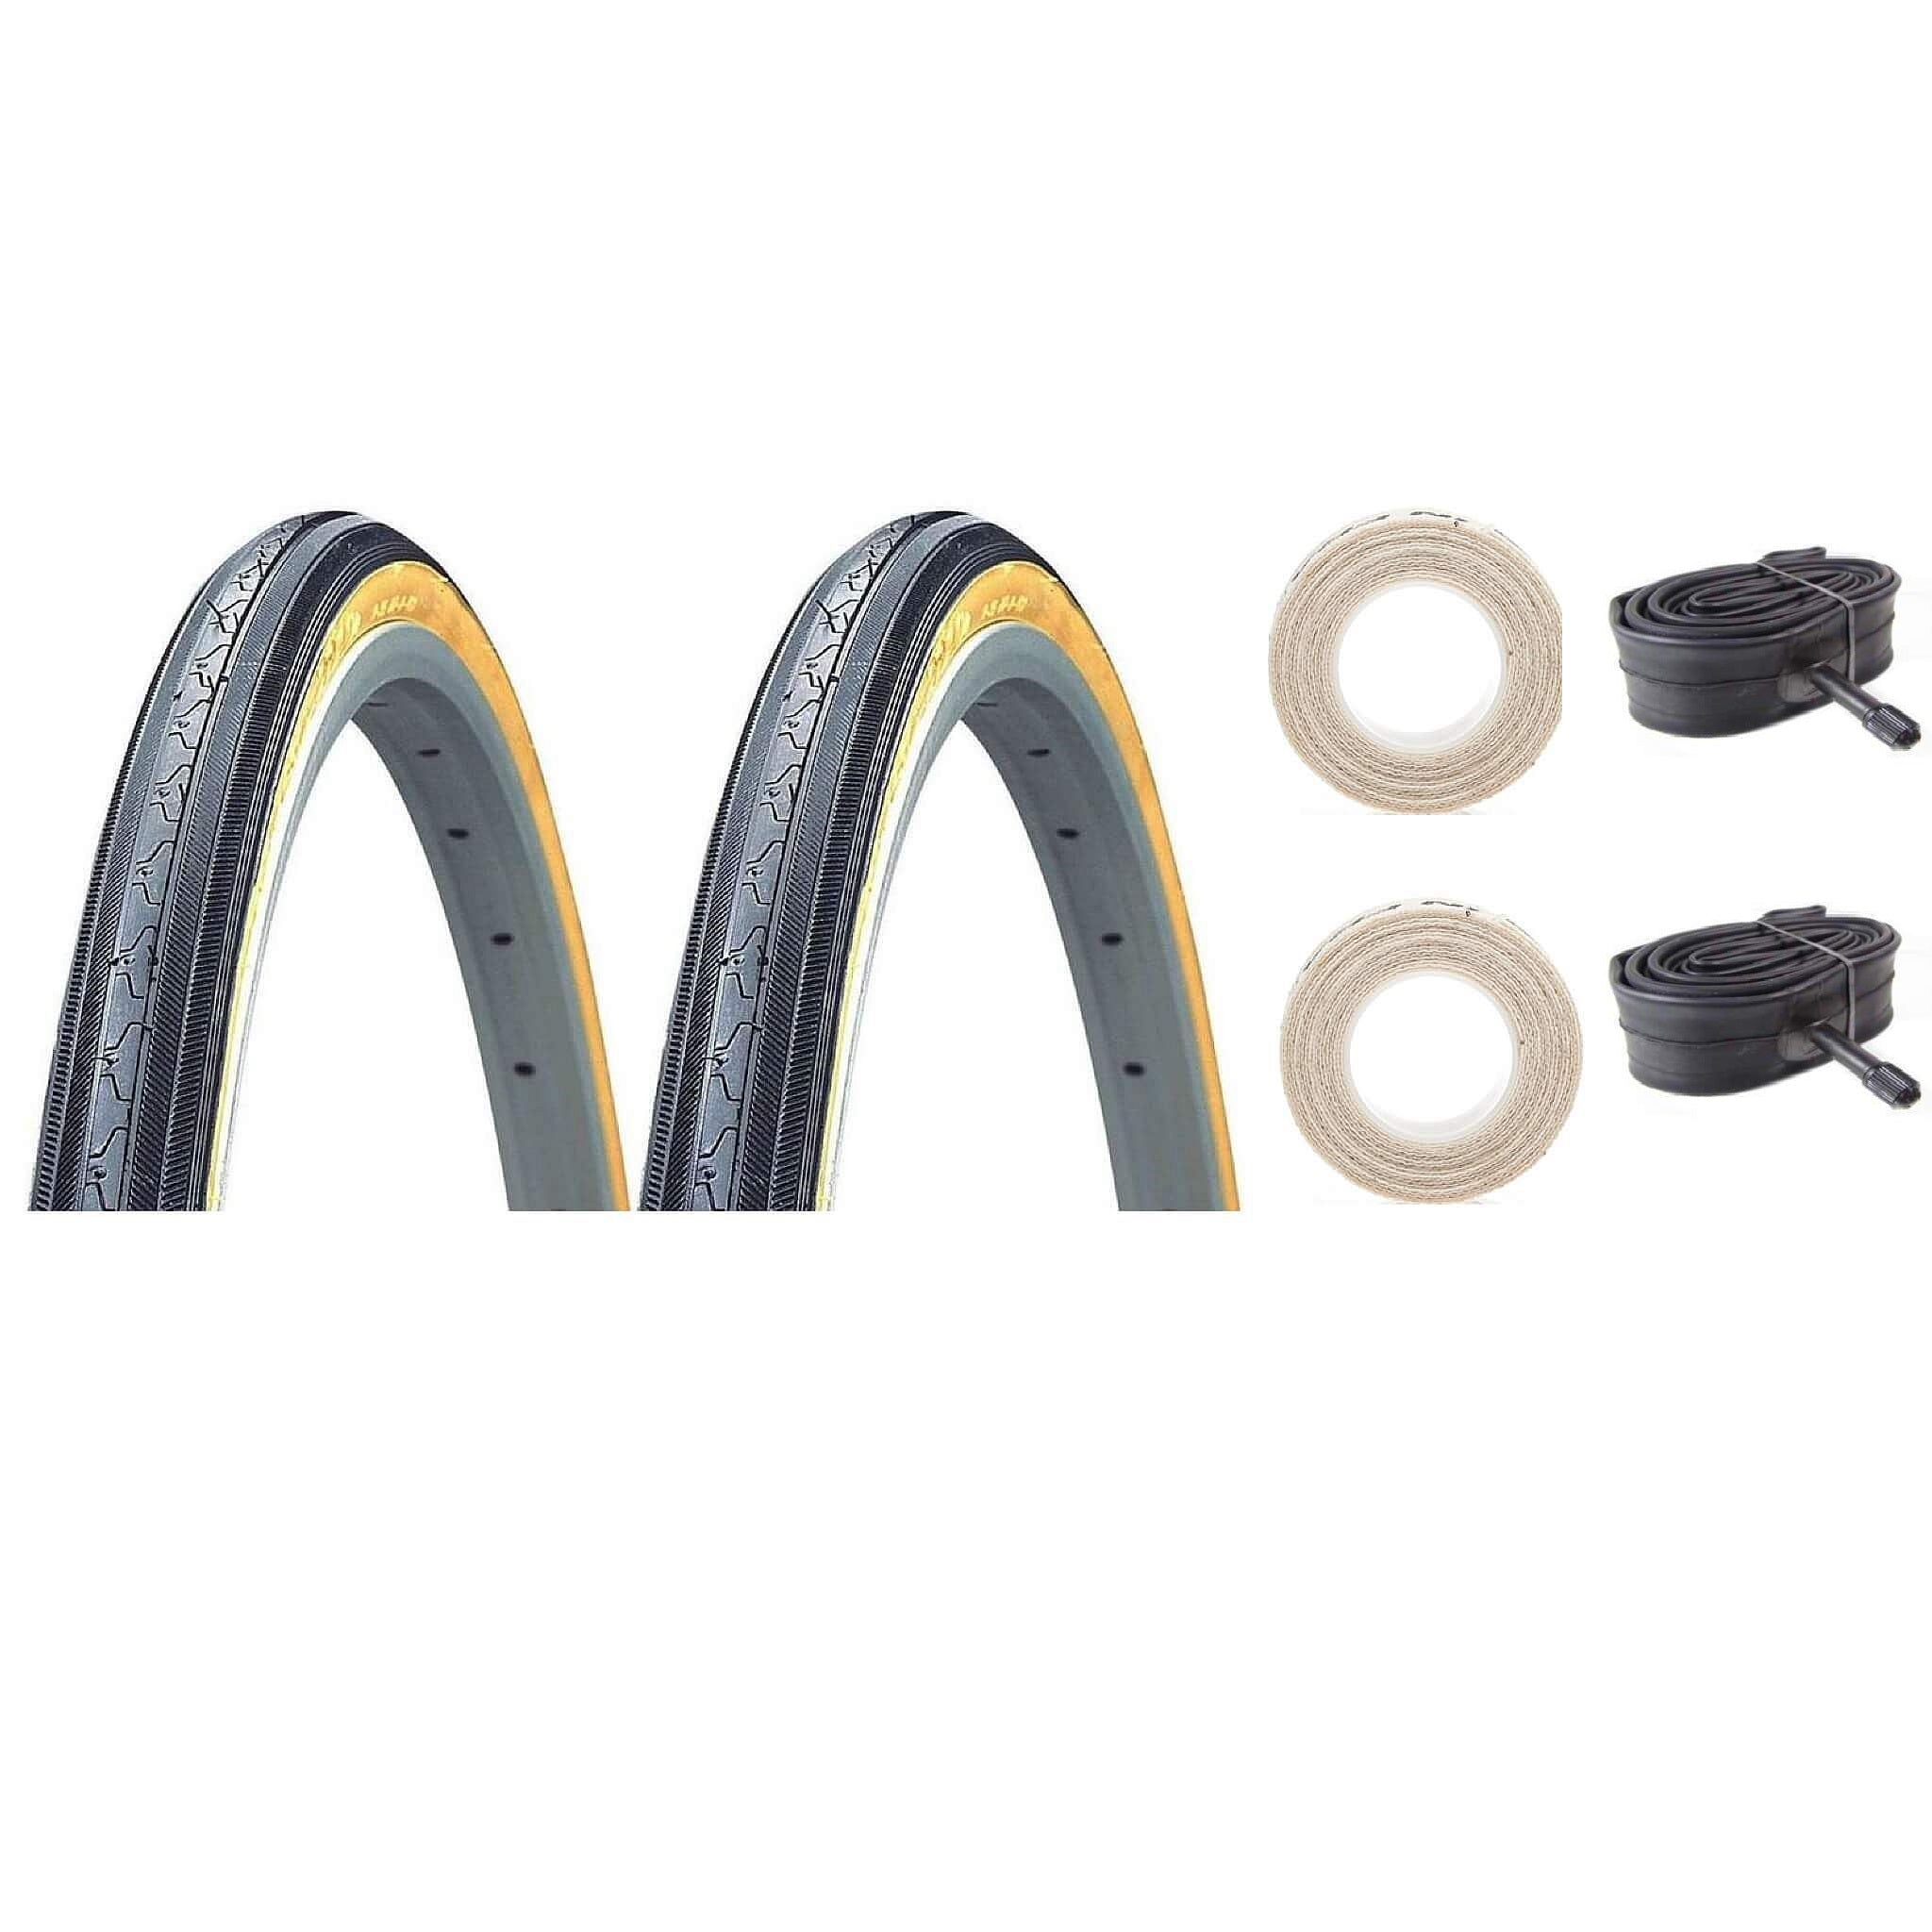 K35 27x1-1/4 gum-wall tire with Schrader tube and cloth rim strips